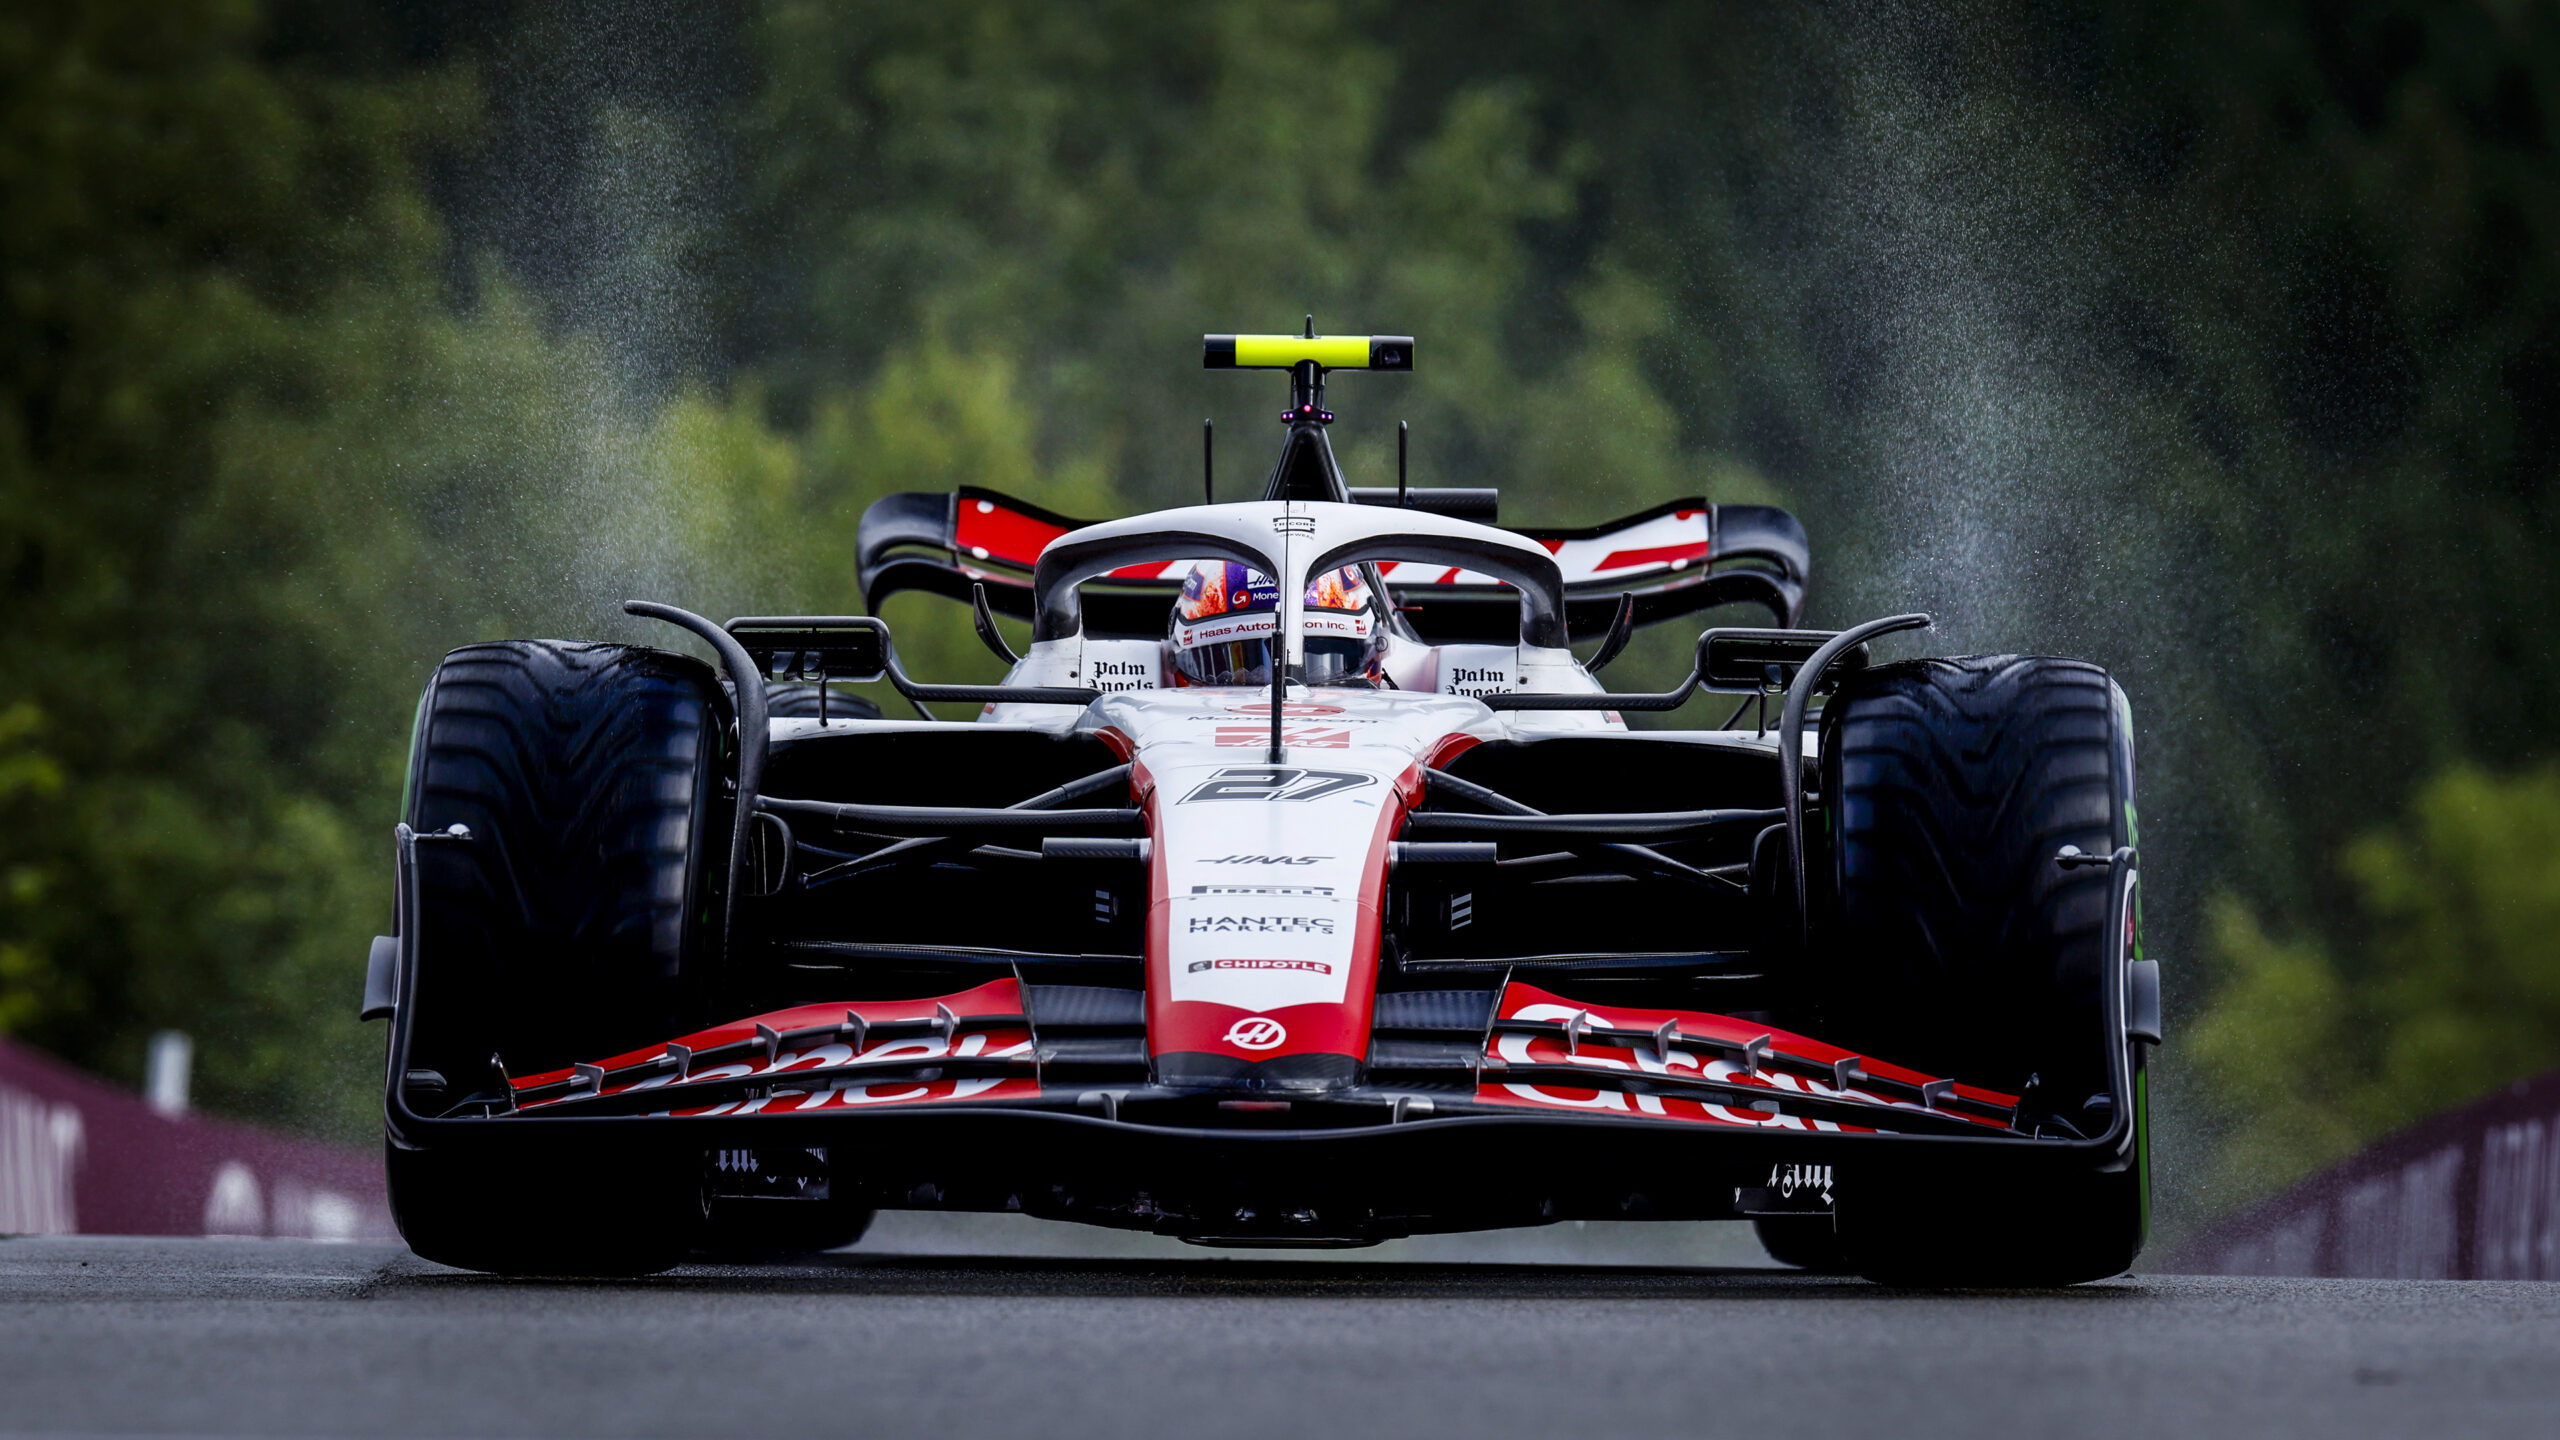 Nico Hulkenberg driving his red and white number 27 Haas car.